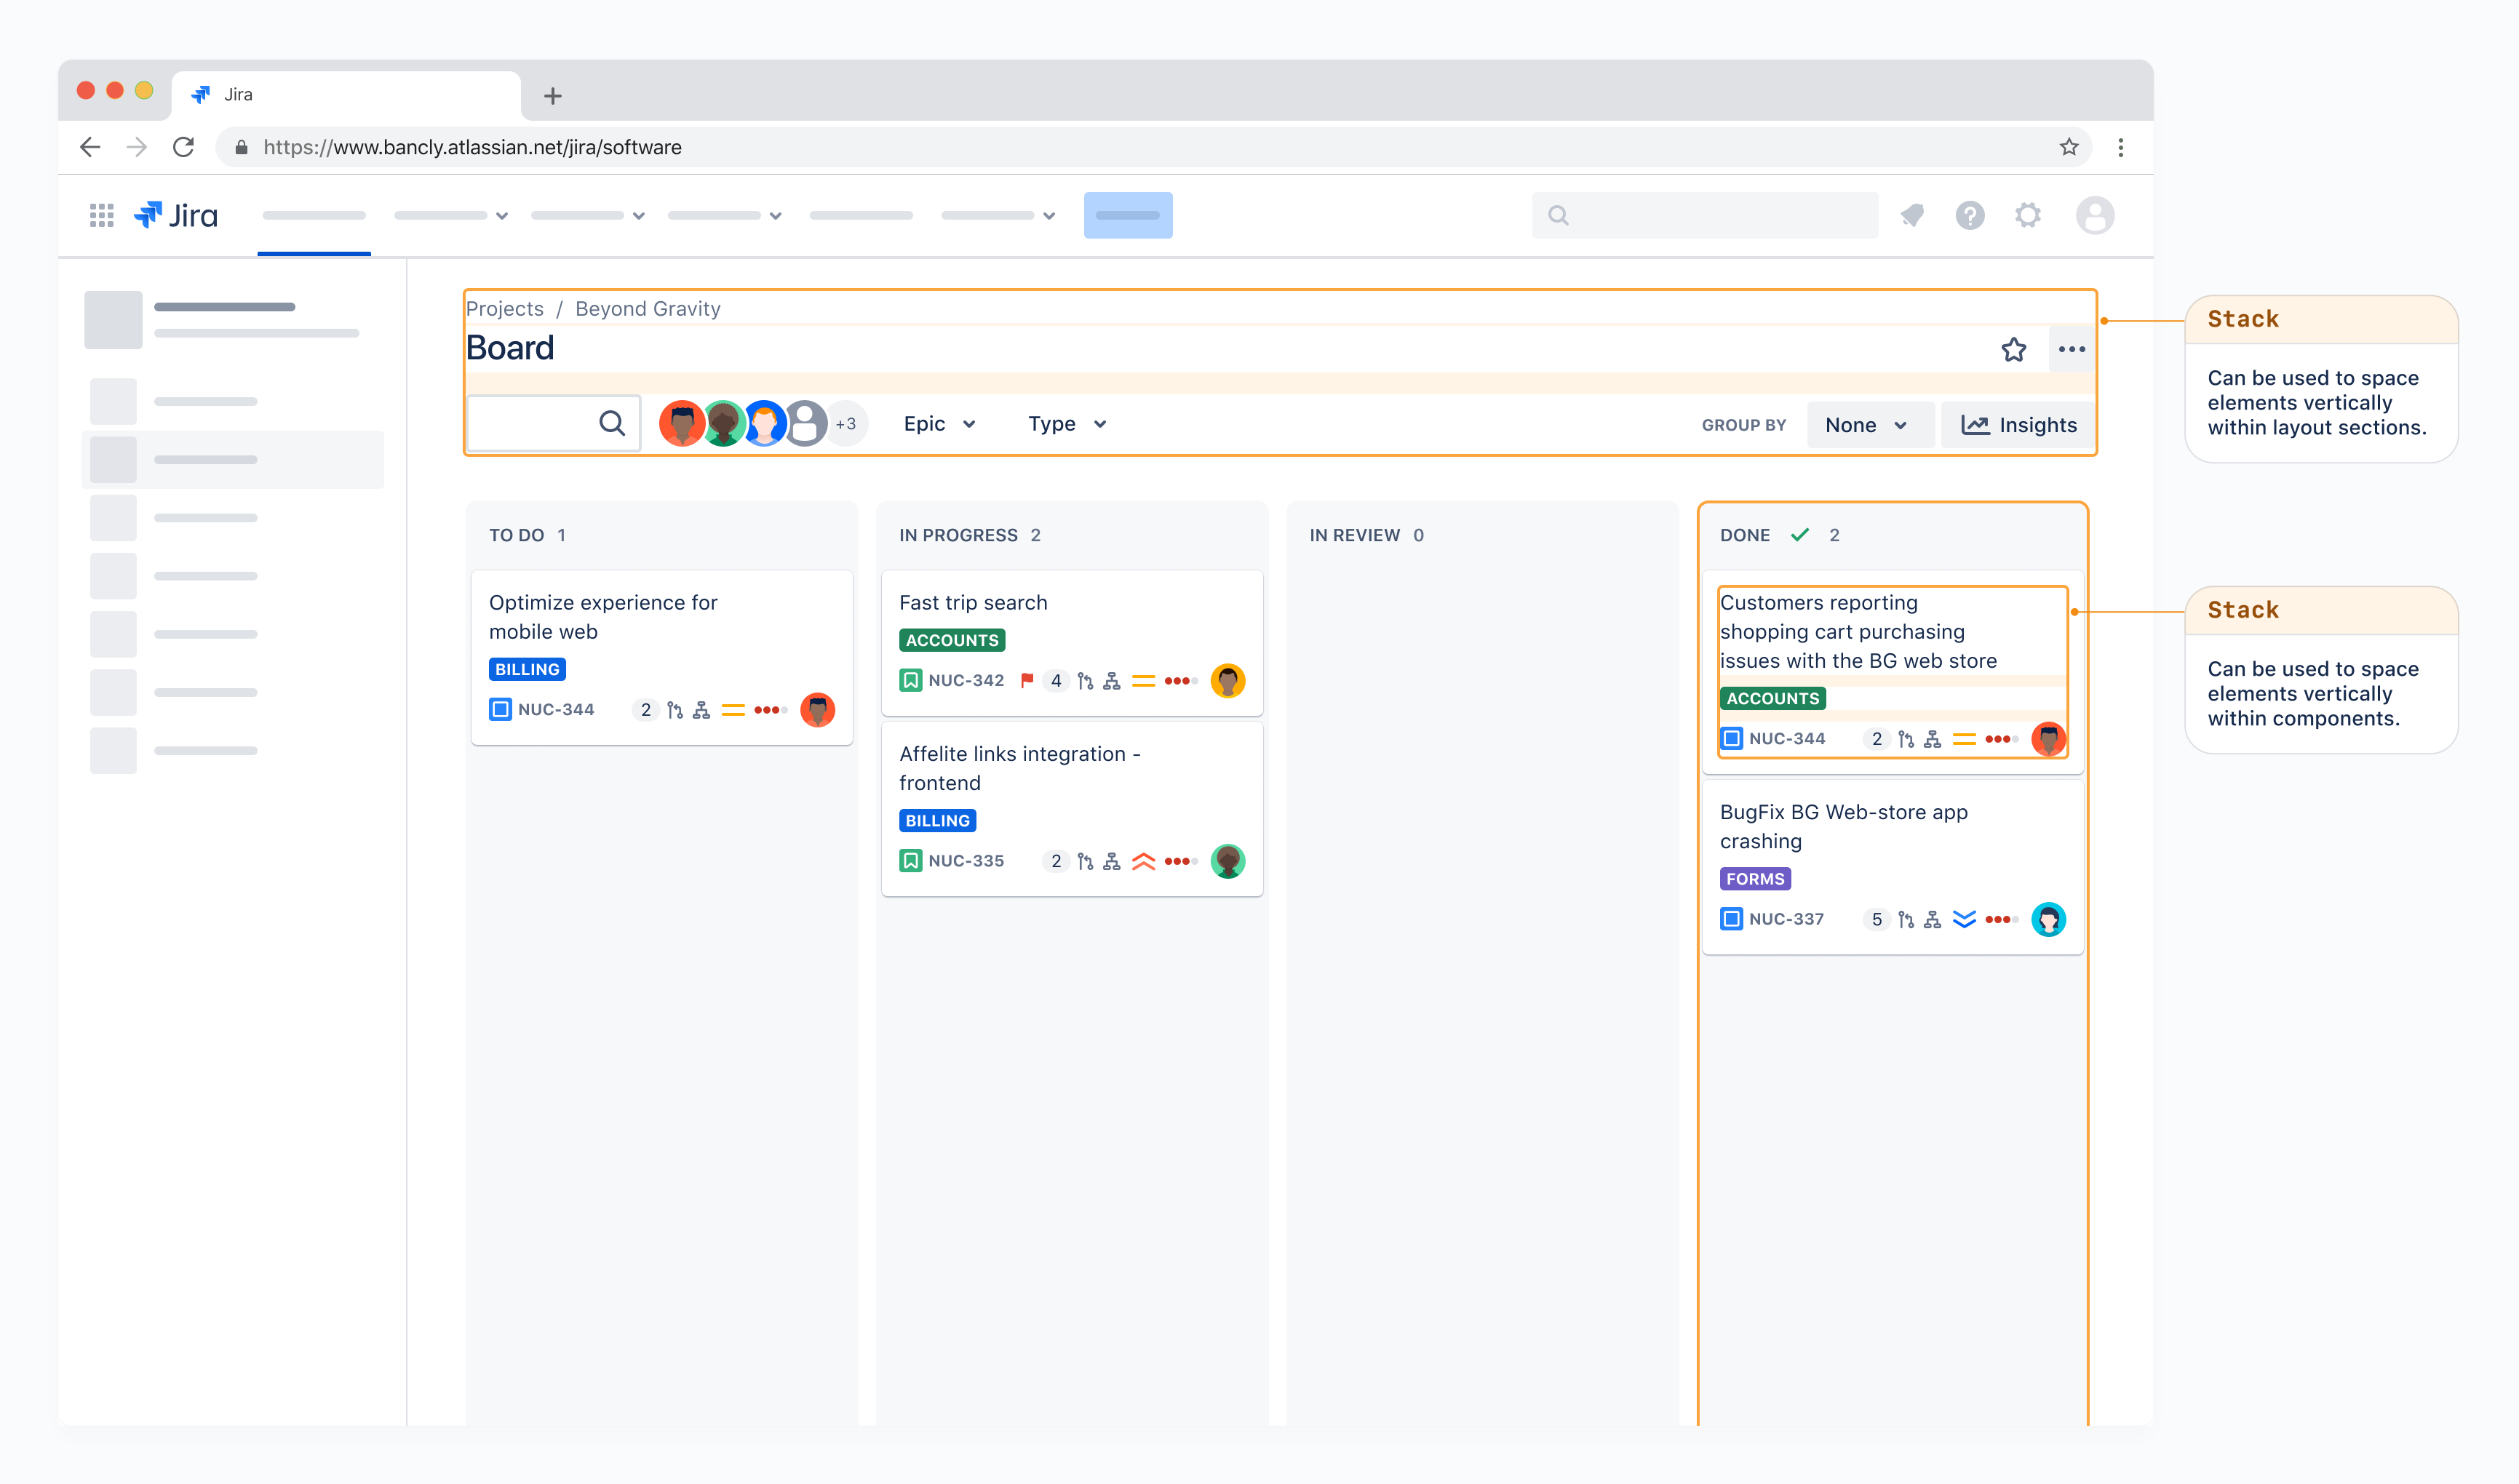 Screenshot of a typical Jira board with swimlanes. Various areas are highlighted as examples of how Stack containers are used for layout